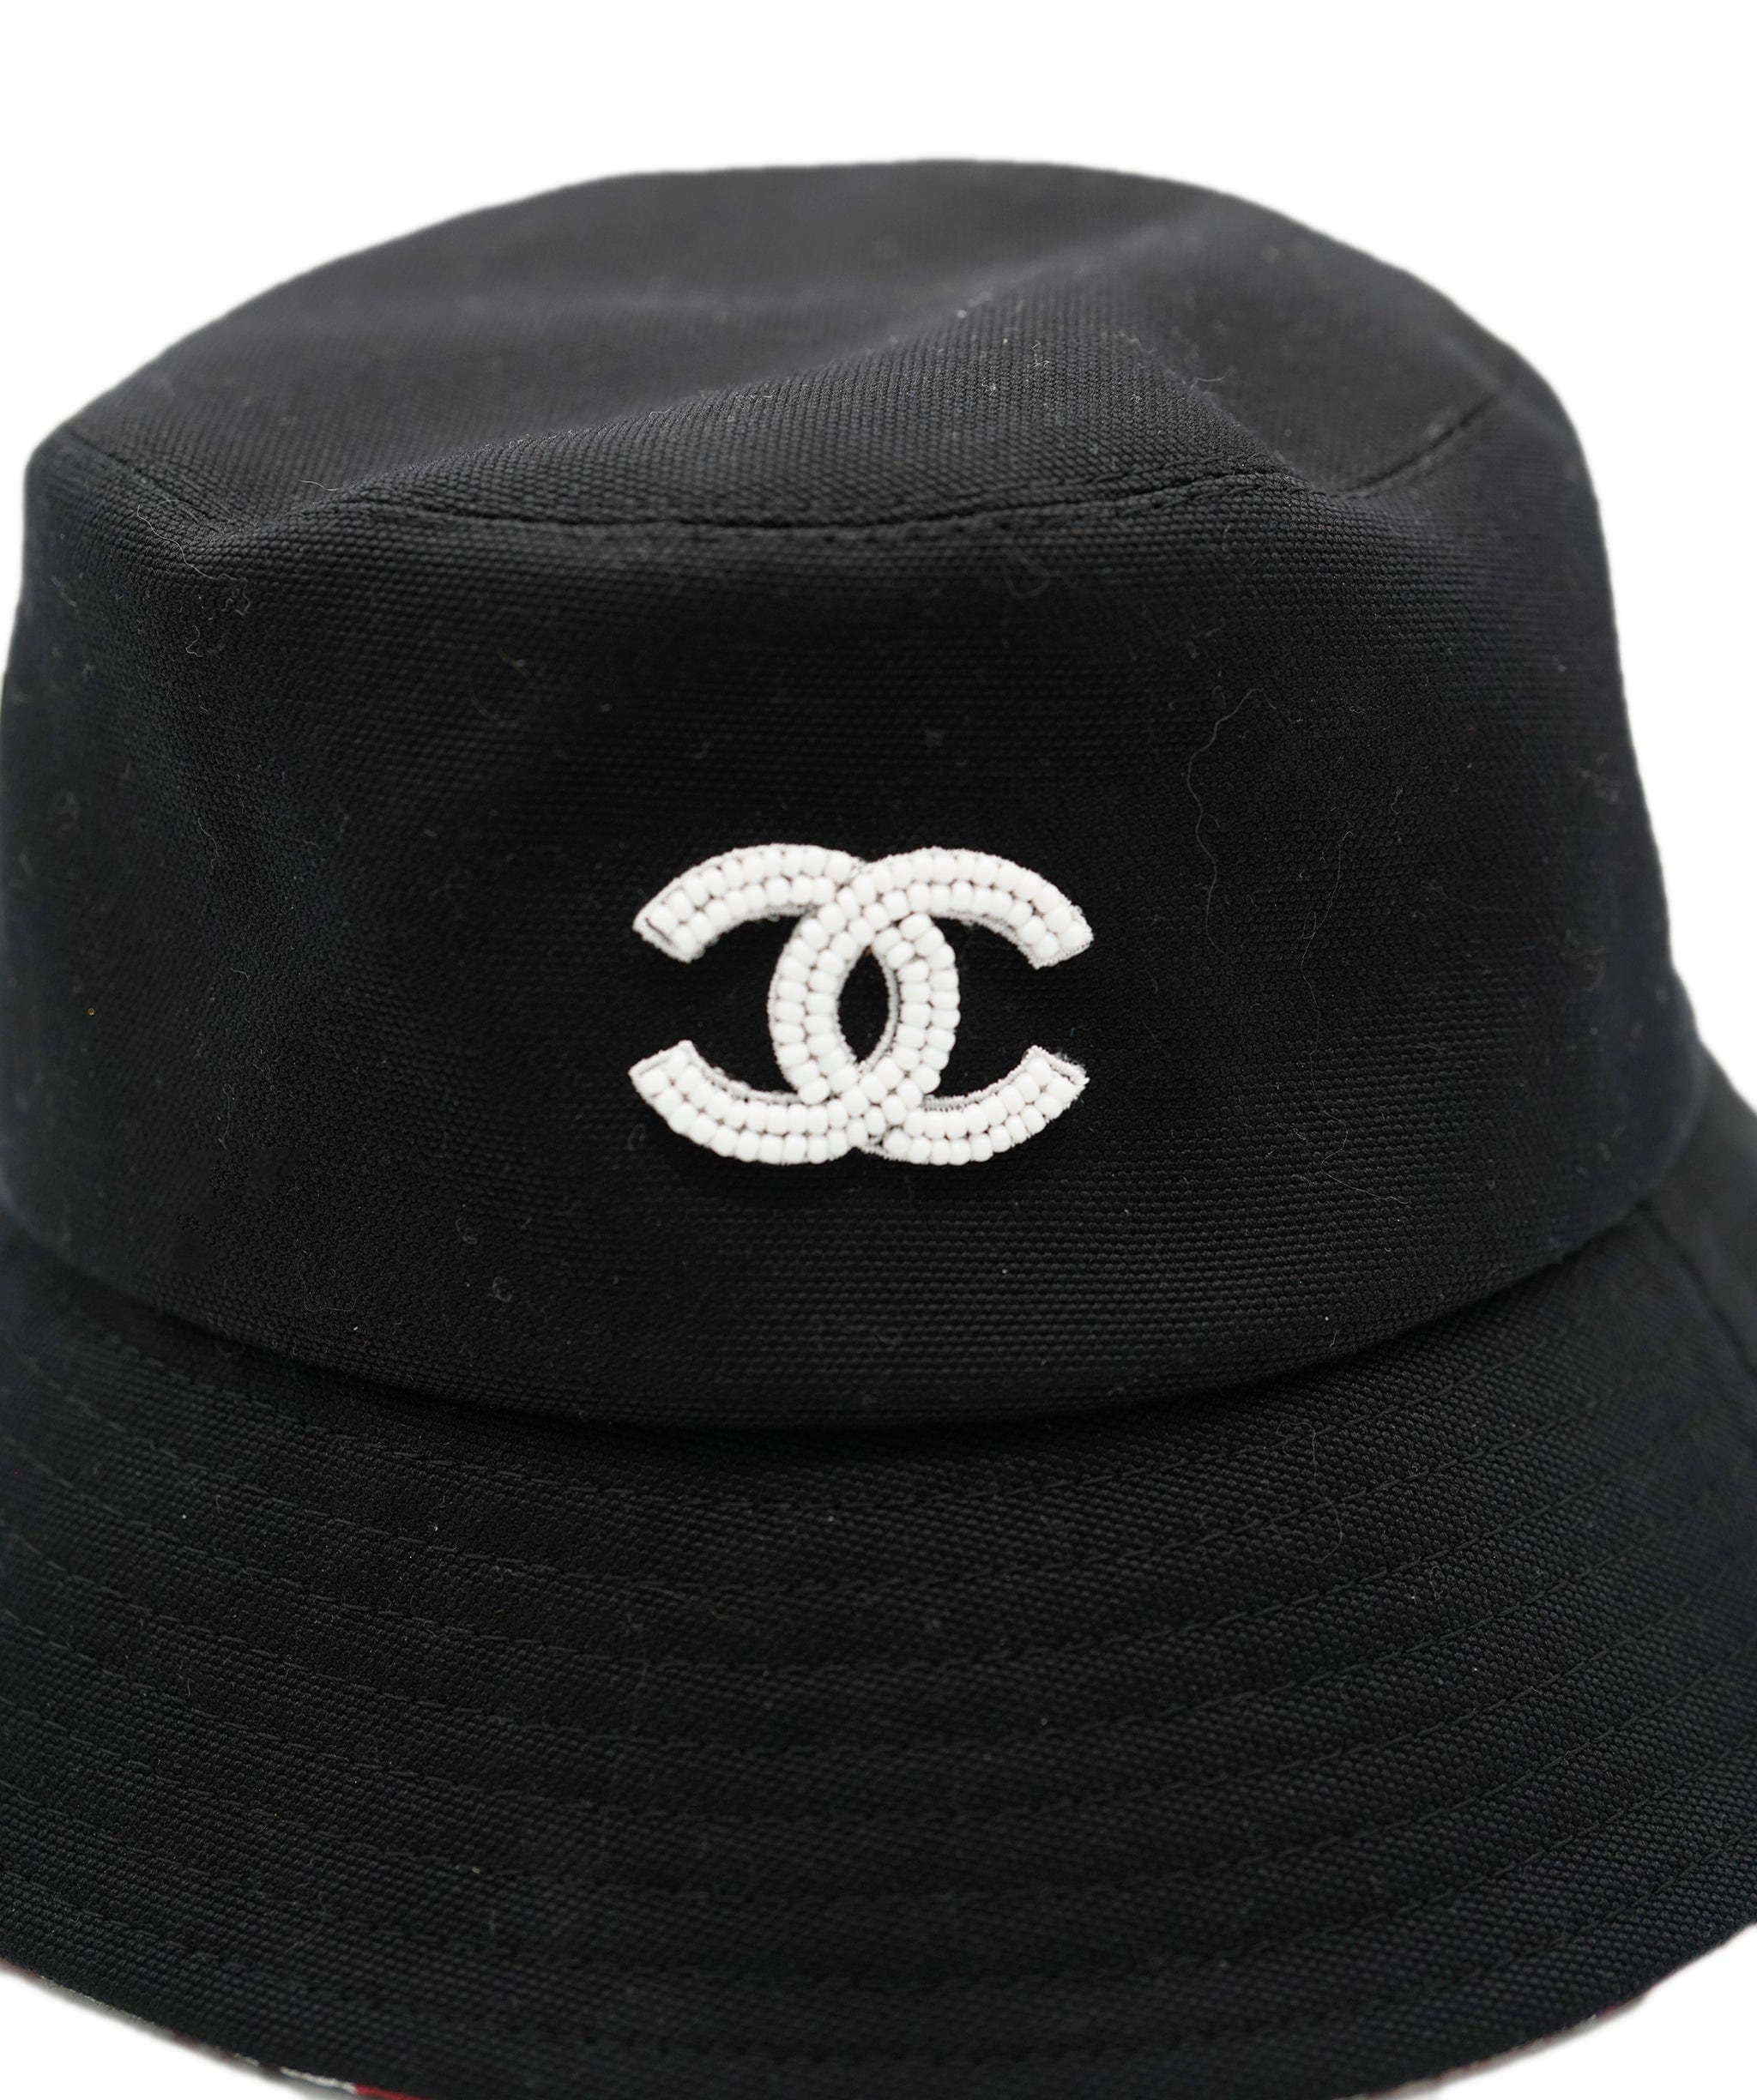 Chanel Chanel Black Bucket Hat with CC pearl Detail ALC1338